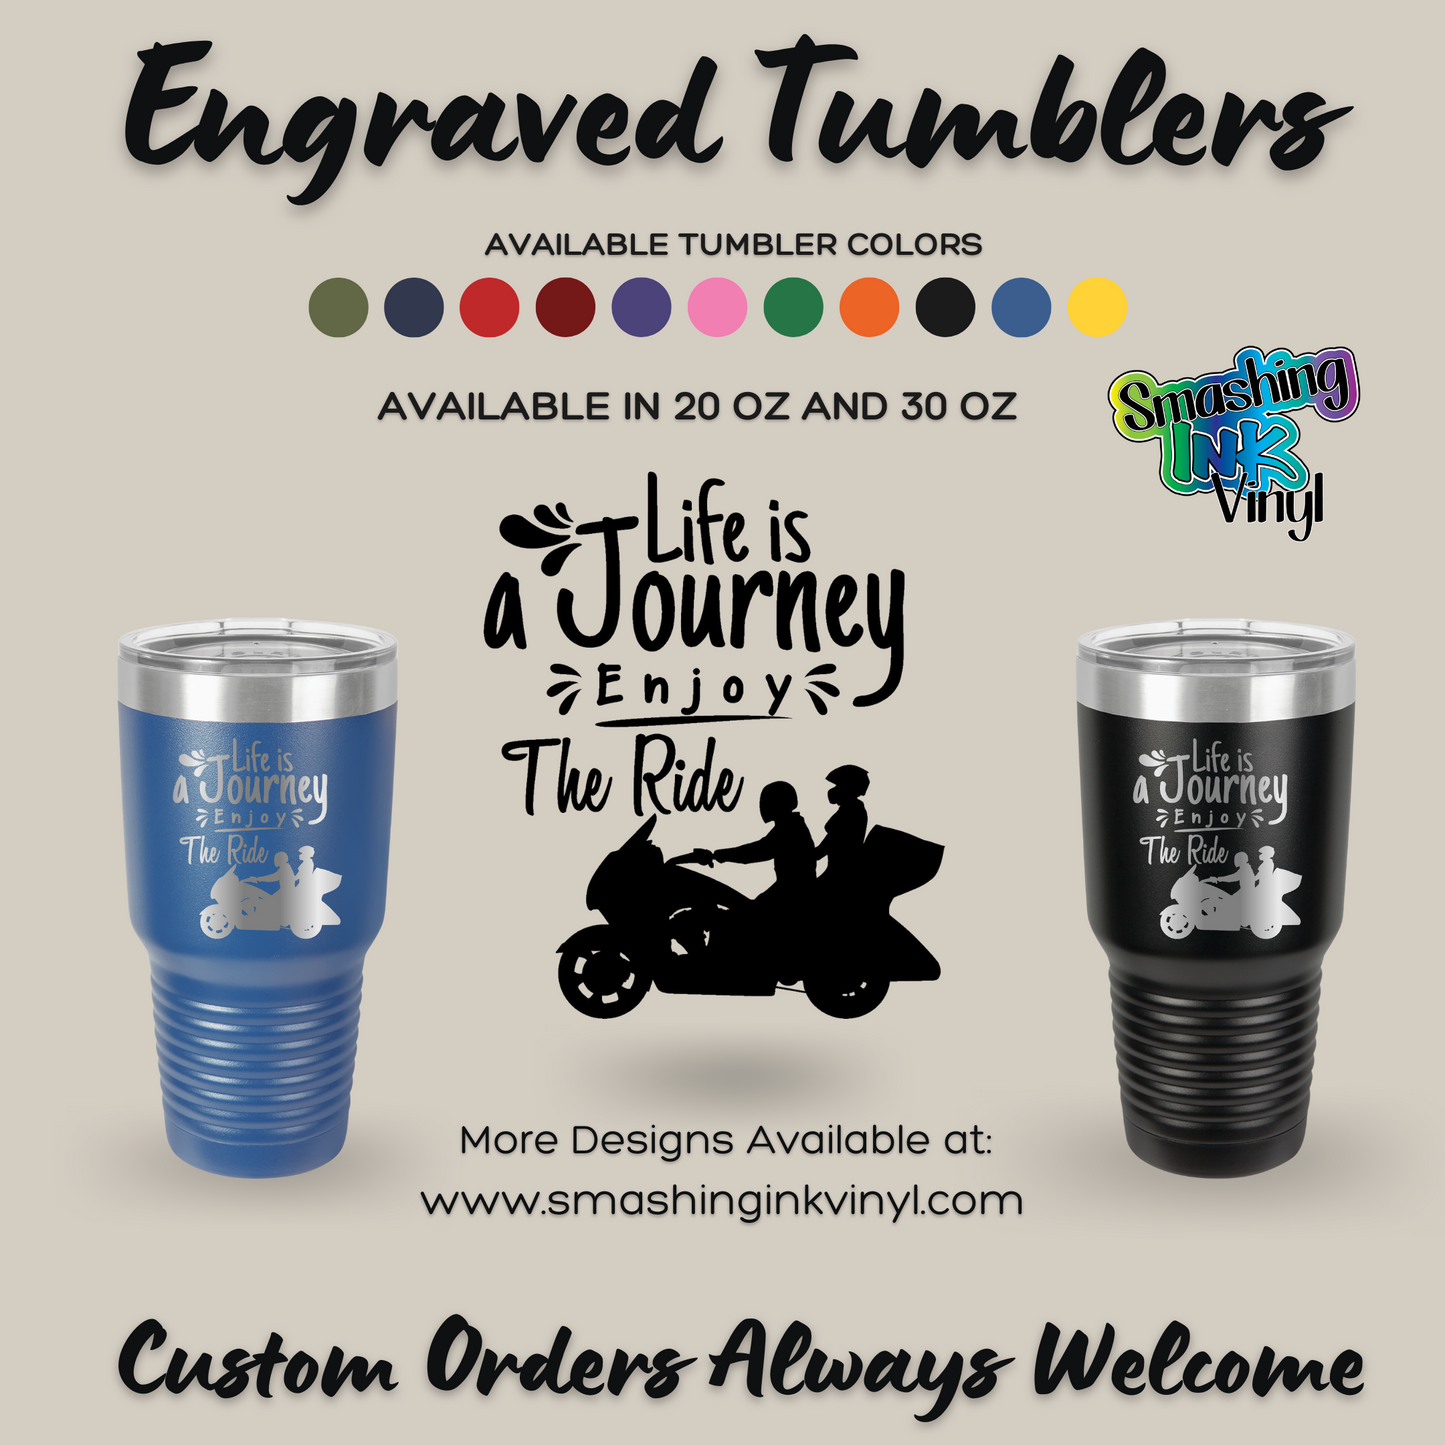 Life is a Journey - Engraved Tumblers (TAT 3-5 BUS DAYS)